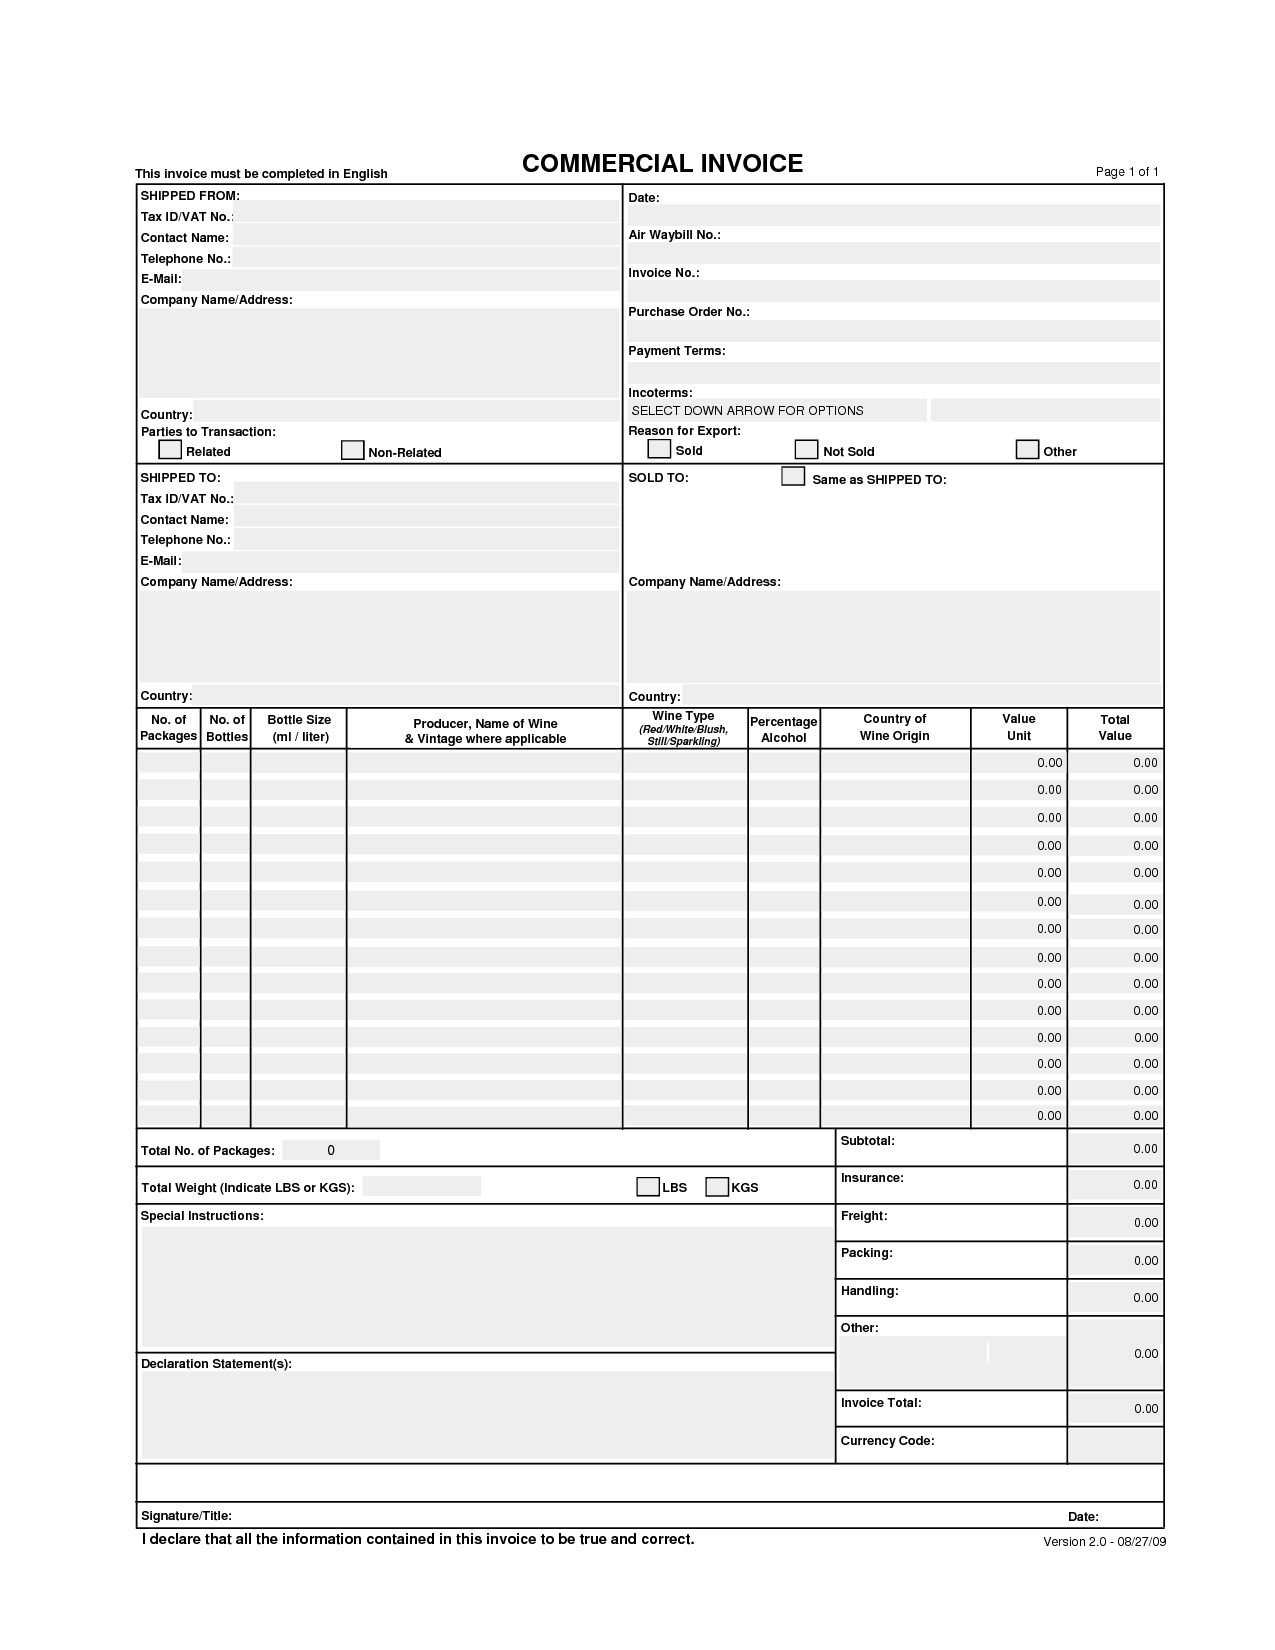 my fedex commercial invoice does not reprint